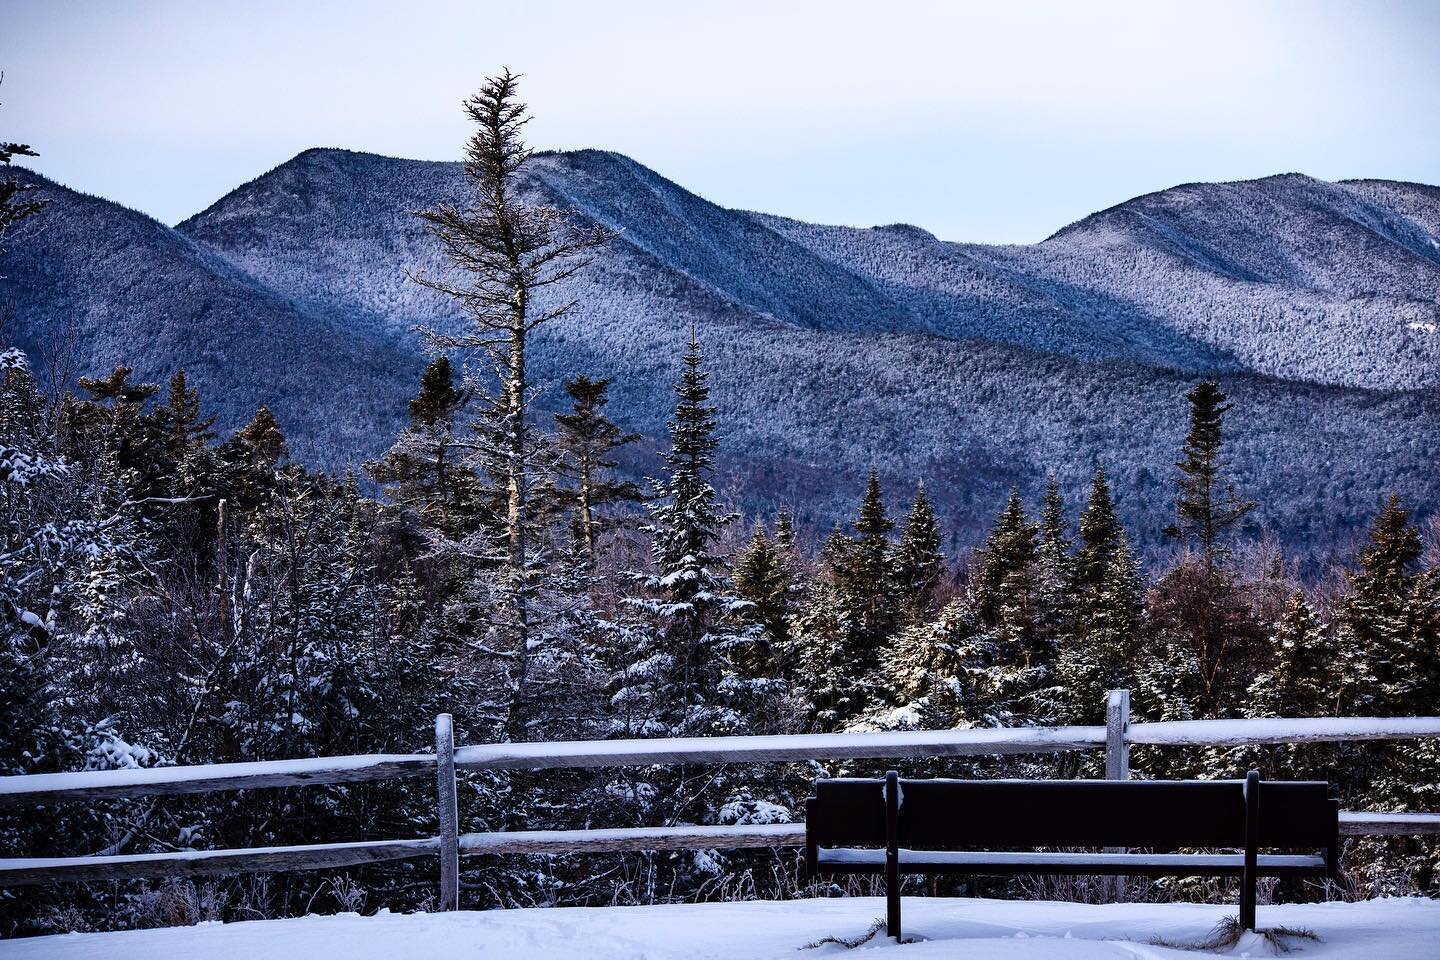 Relax With a View in the White Mountains 🗻
01.03.2020
Route 112
New Hampshire 

#whitemountains #tranquilo #explore #travel #landscapephotography #snow #scenic #winter #newhampshire #forest #floresta #kancamagus #highway #mountains #Invierno #invern